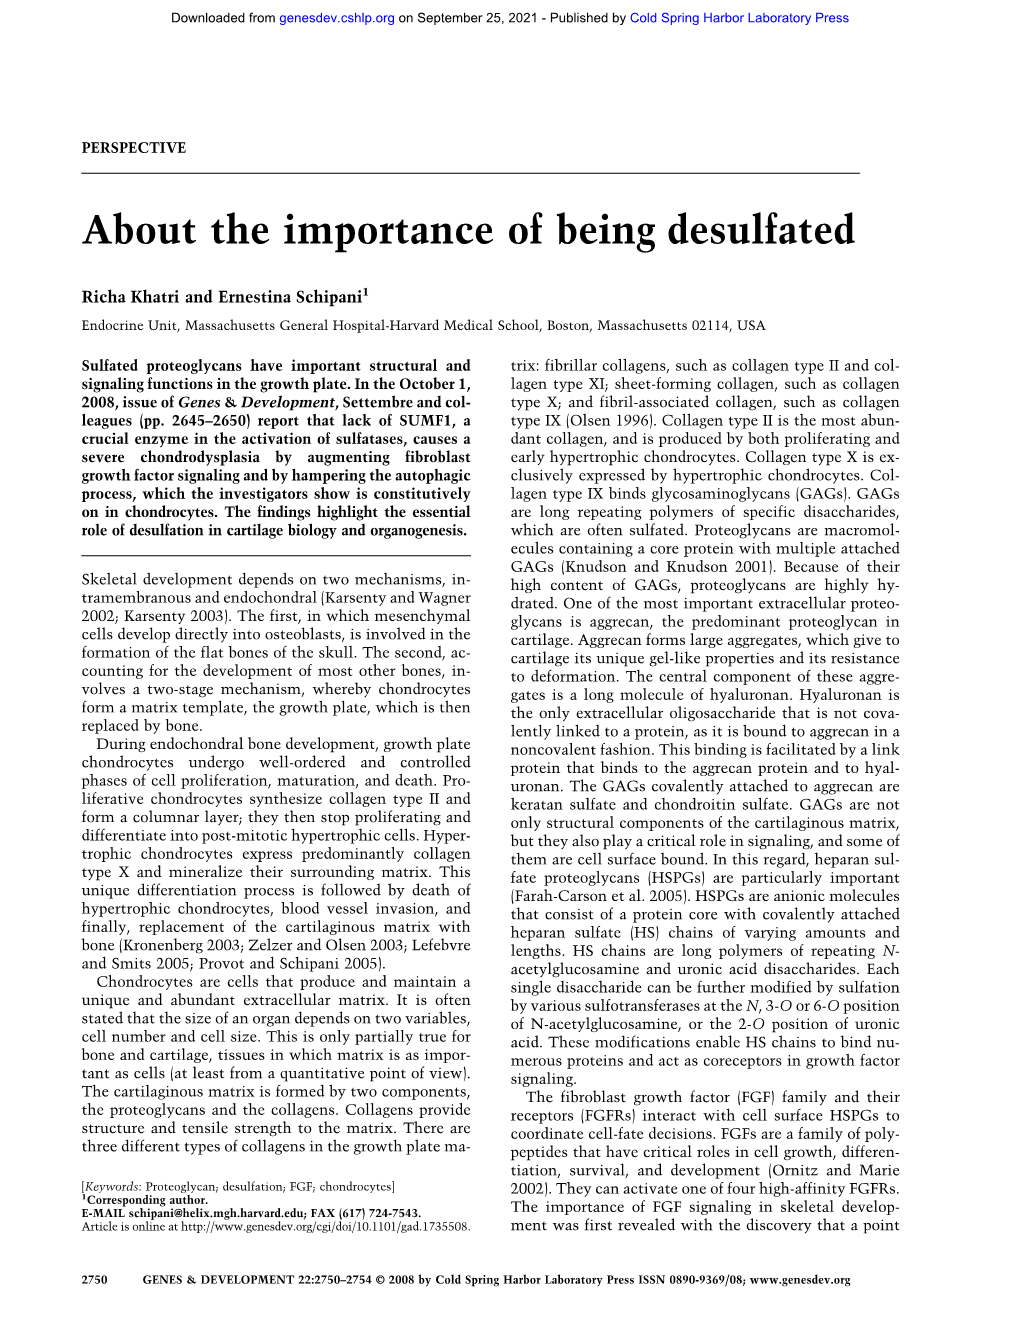 About the Importance of Being Desulfated